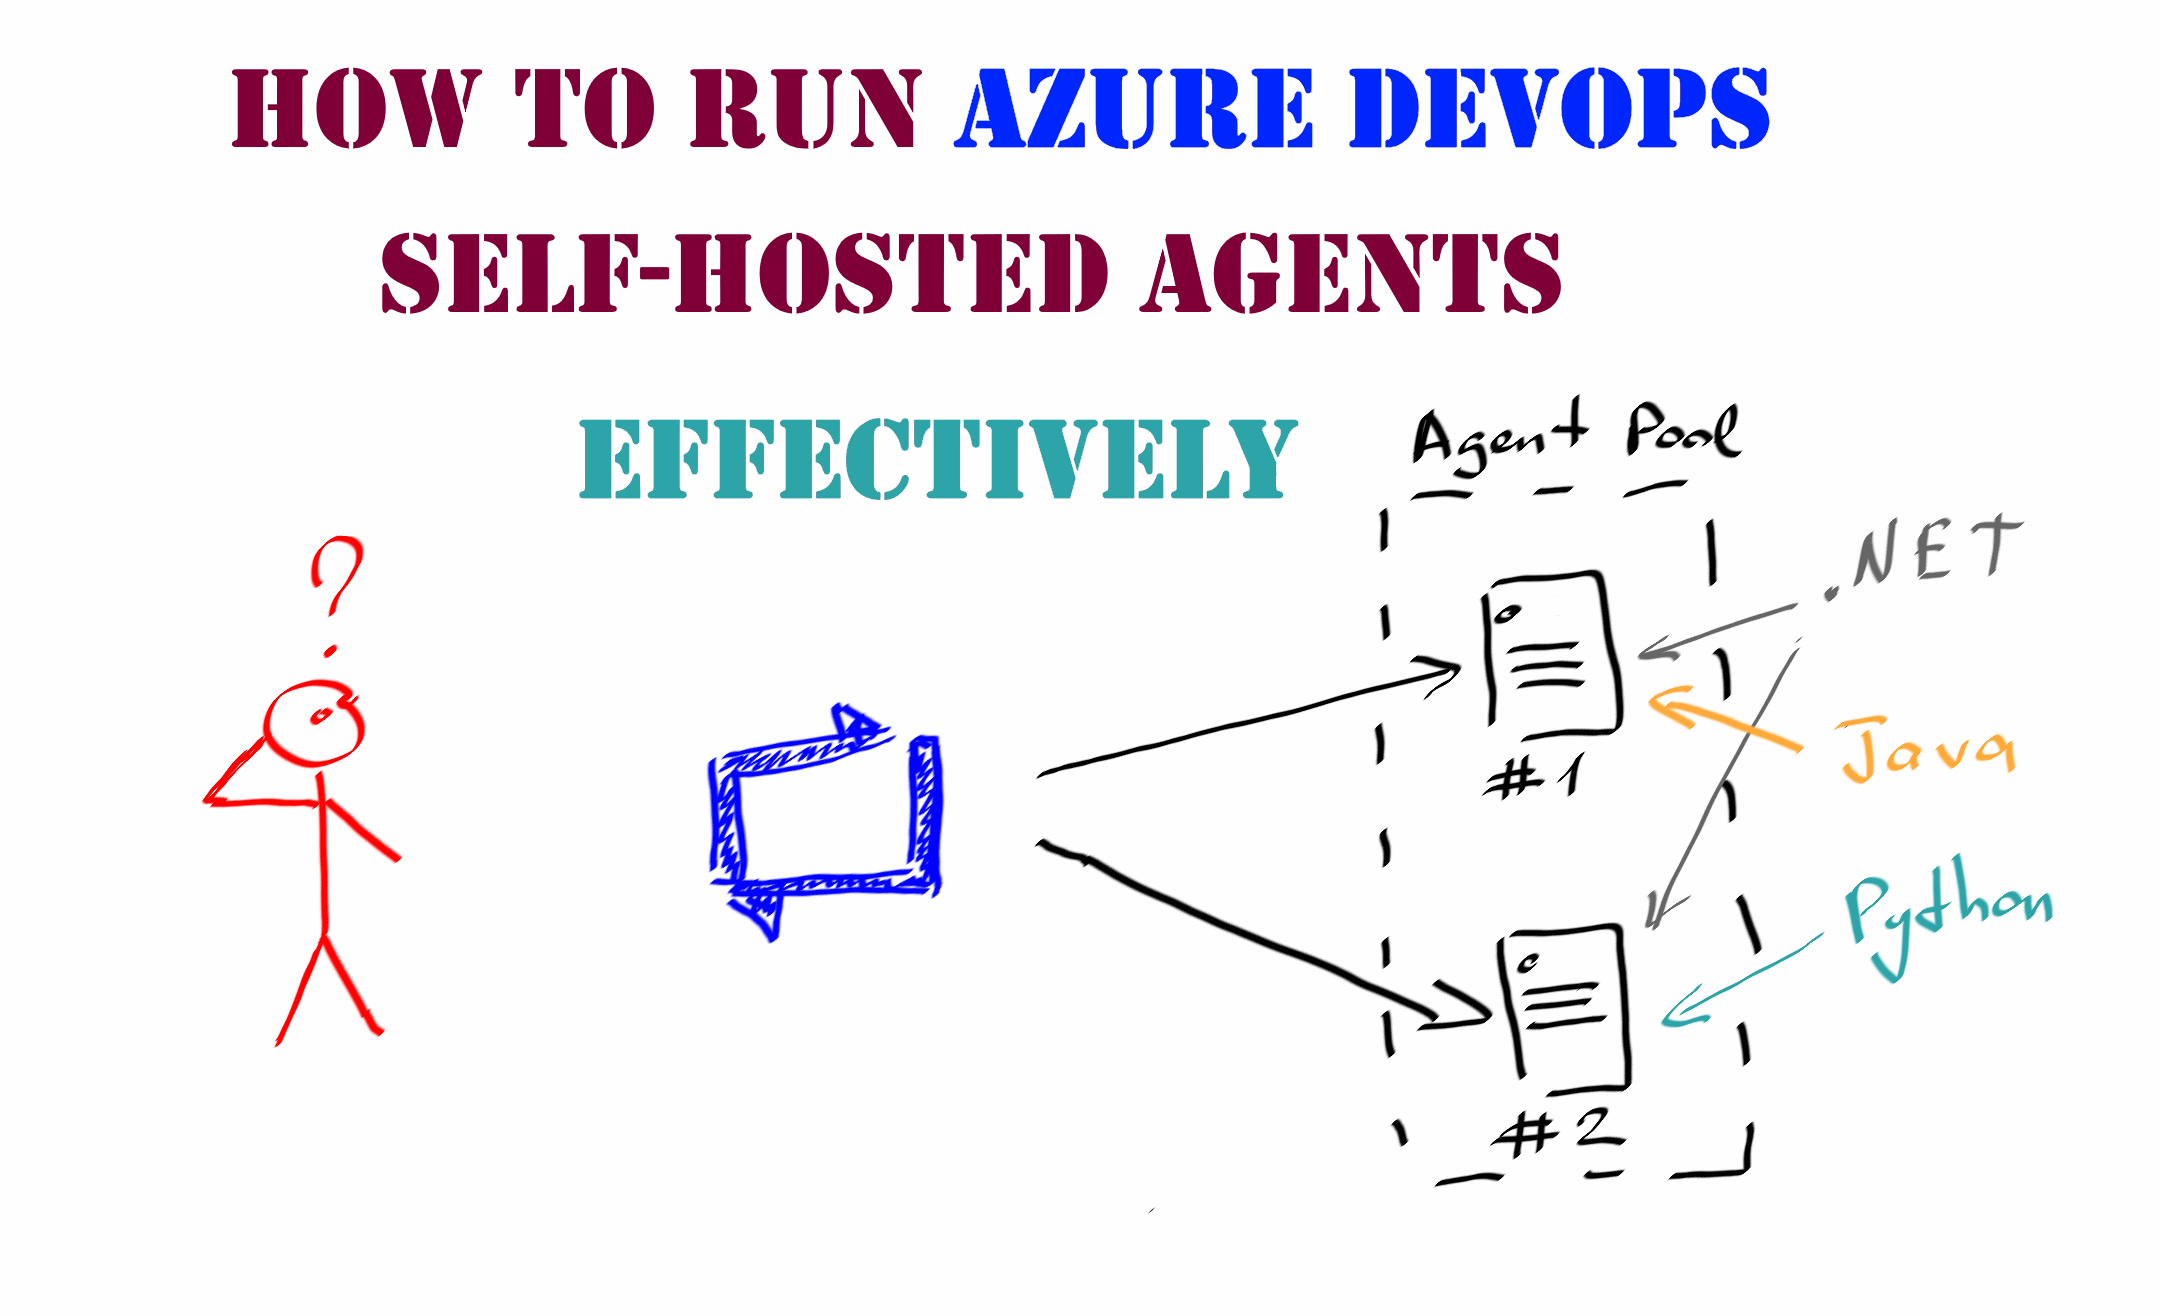 How to run Azure DevOps selfhosted agents effectively